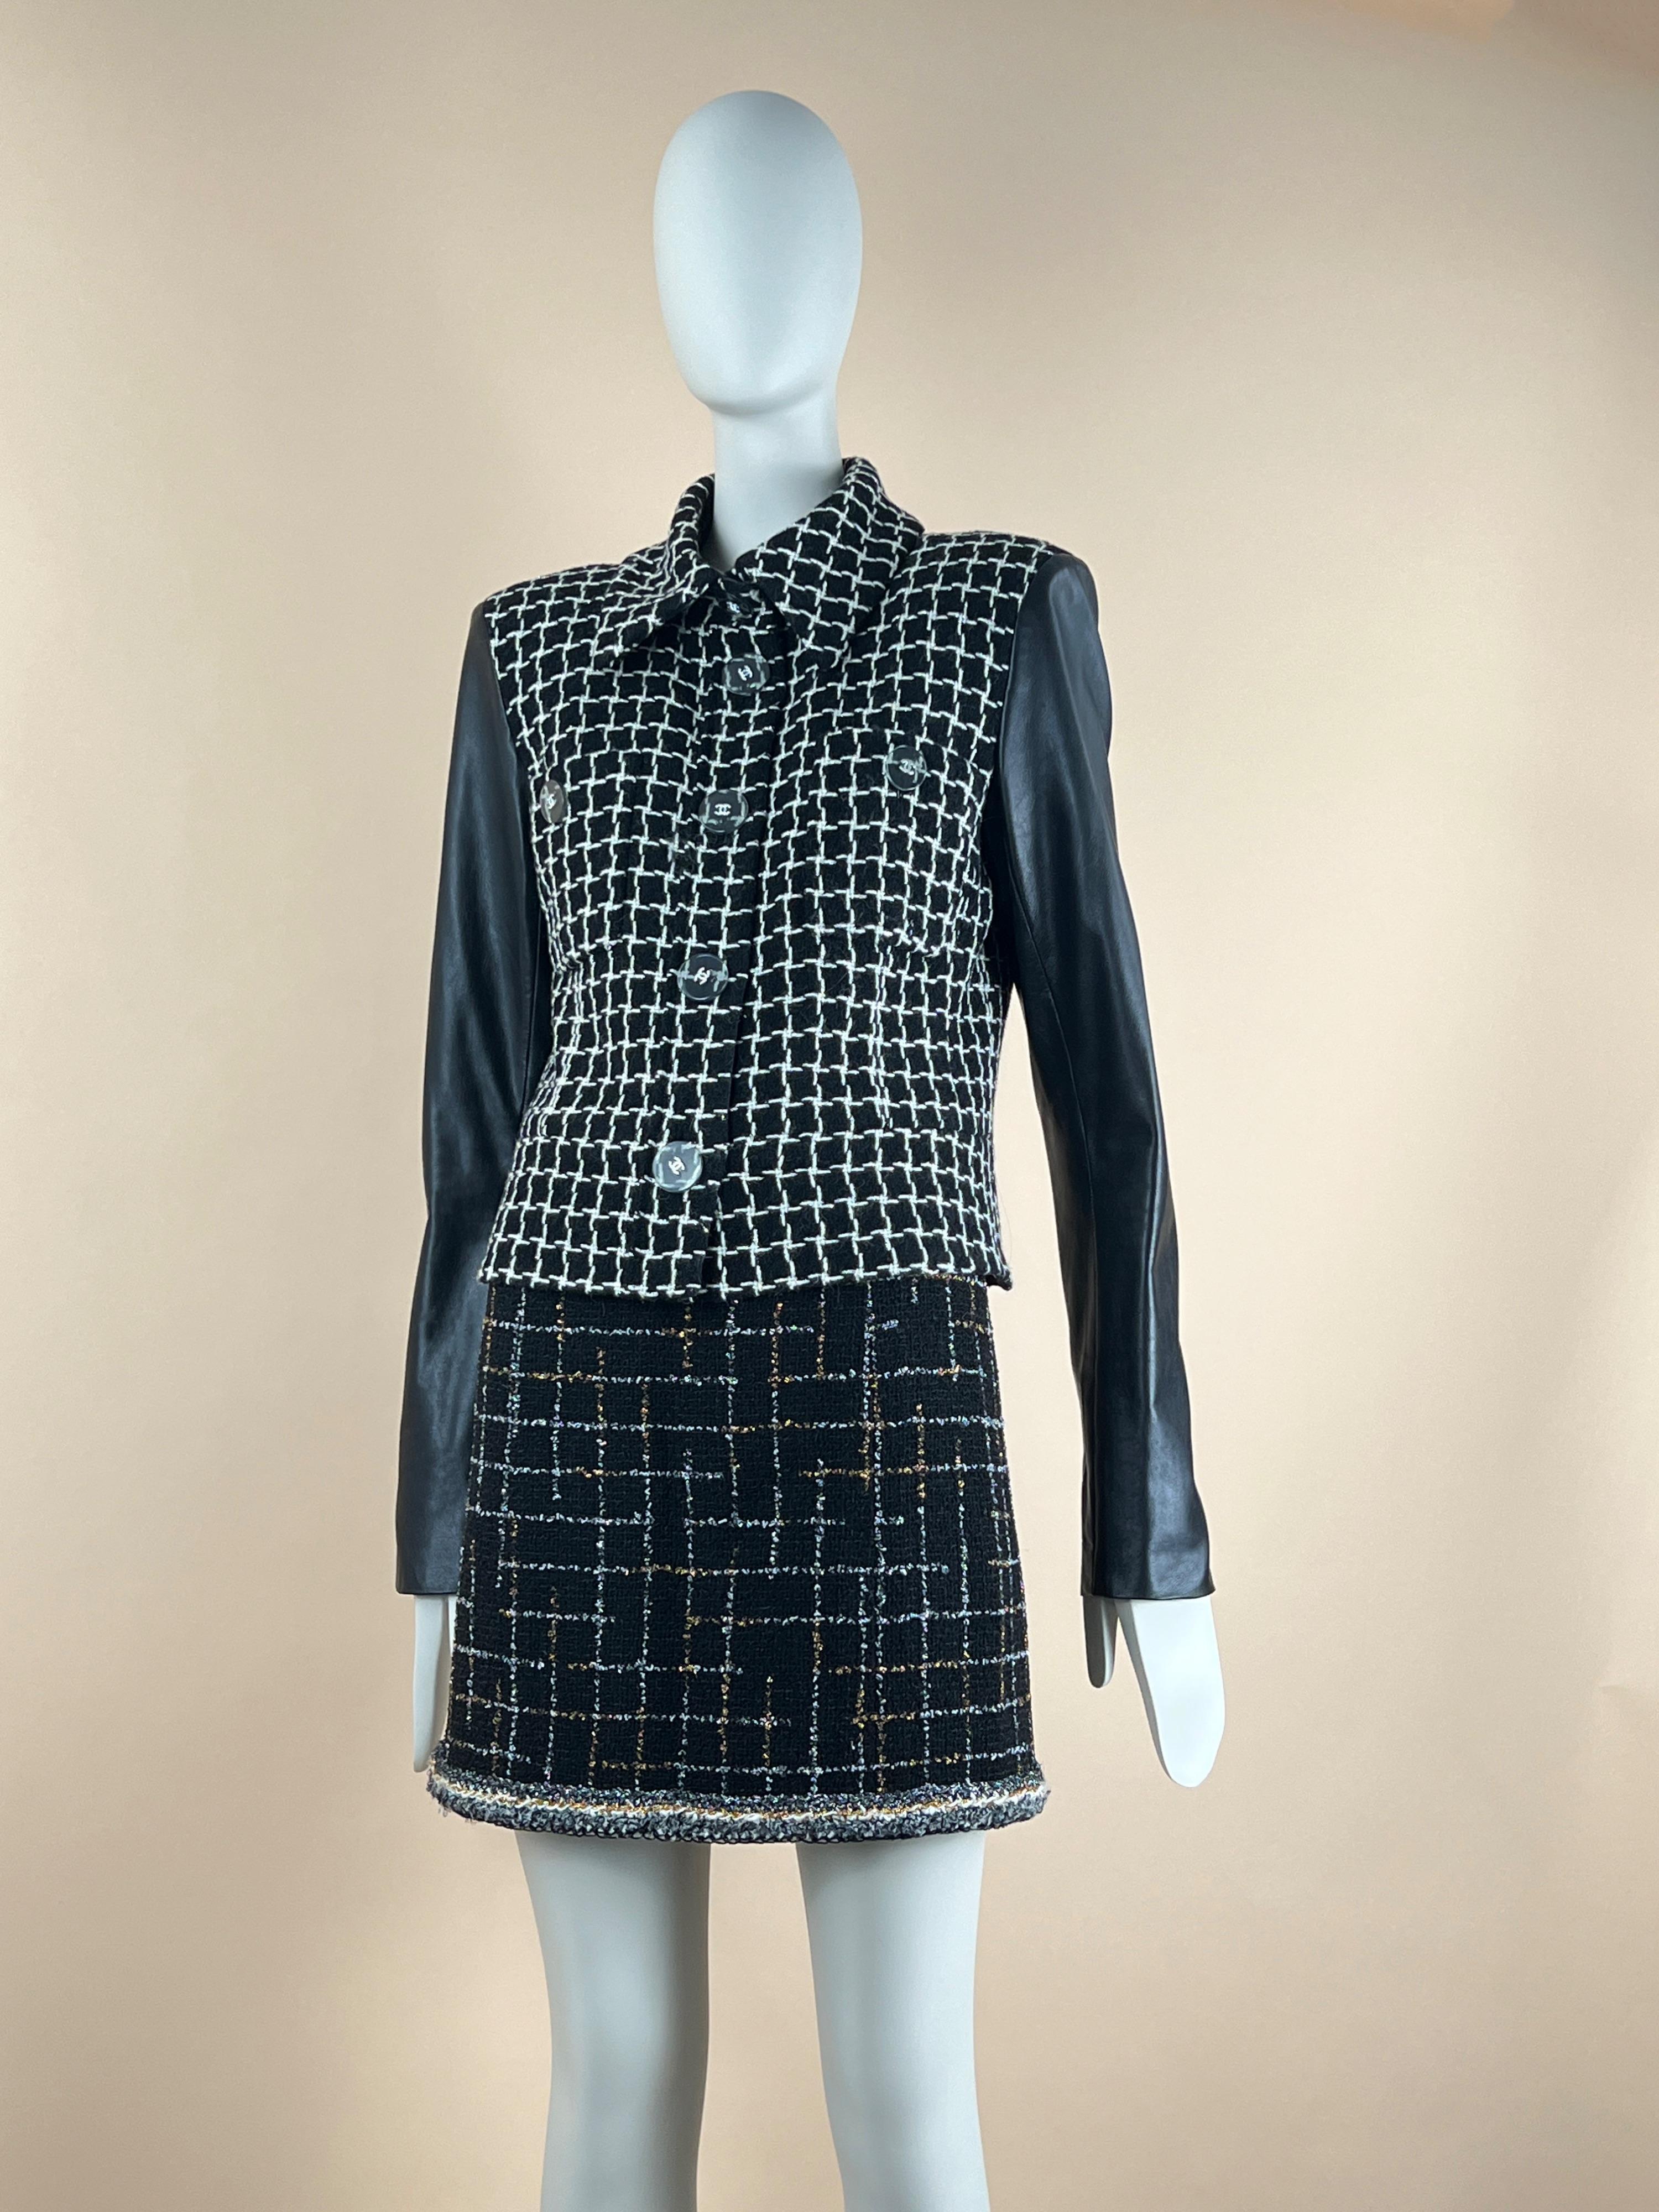 Chanel Cosmopolite Collection Black Tweed Jacket  In New Condition For Sale In Dubai, AE